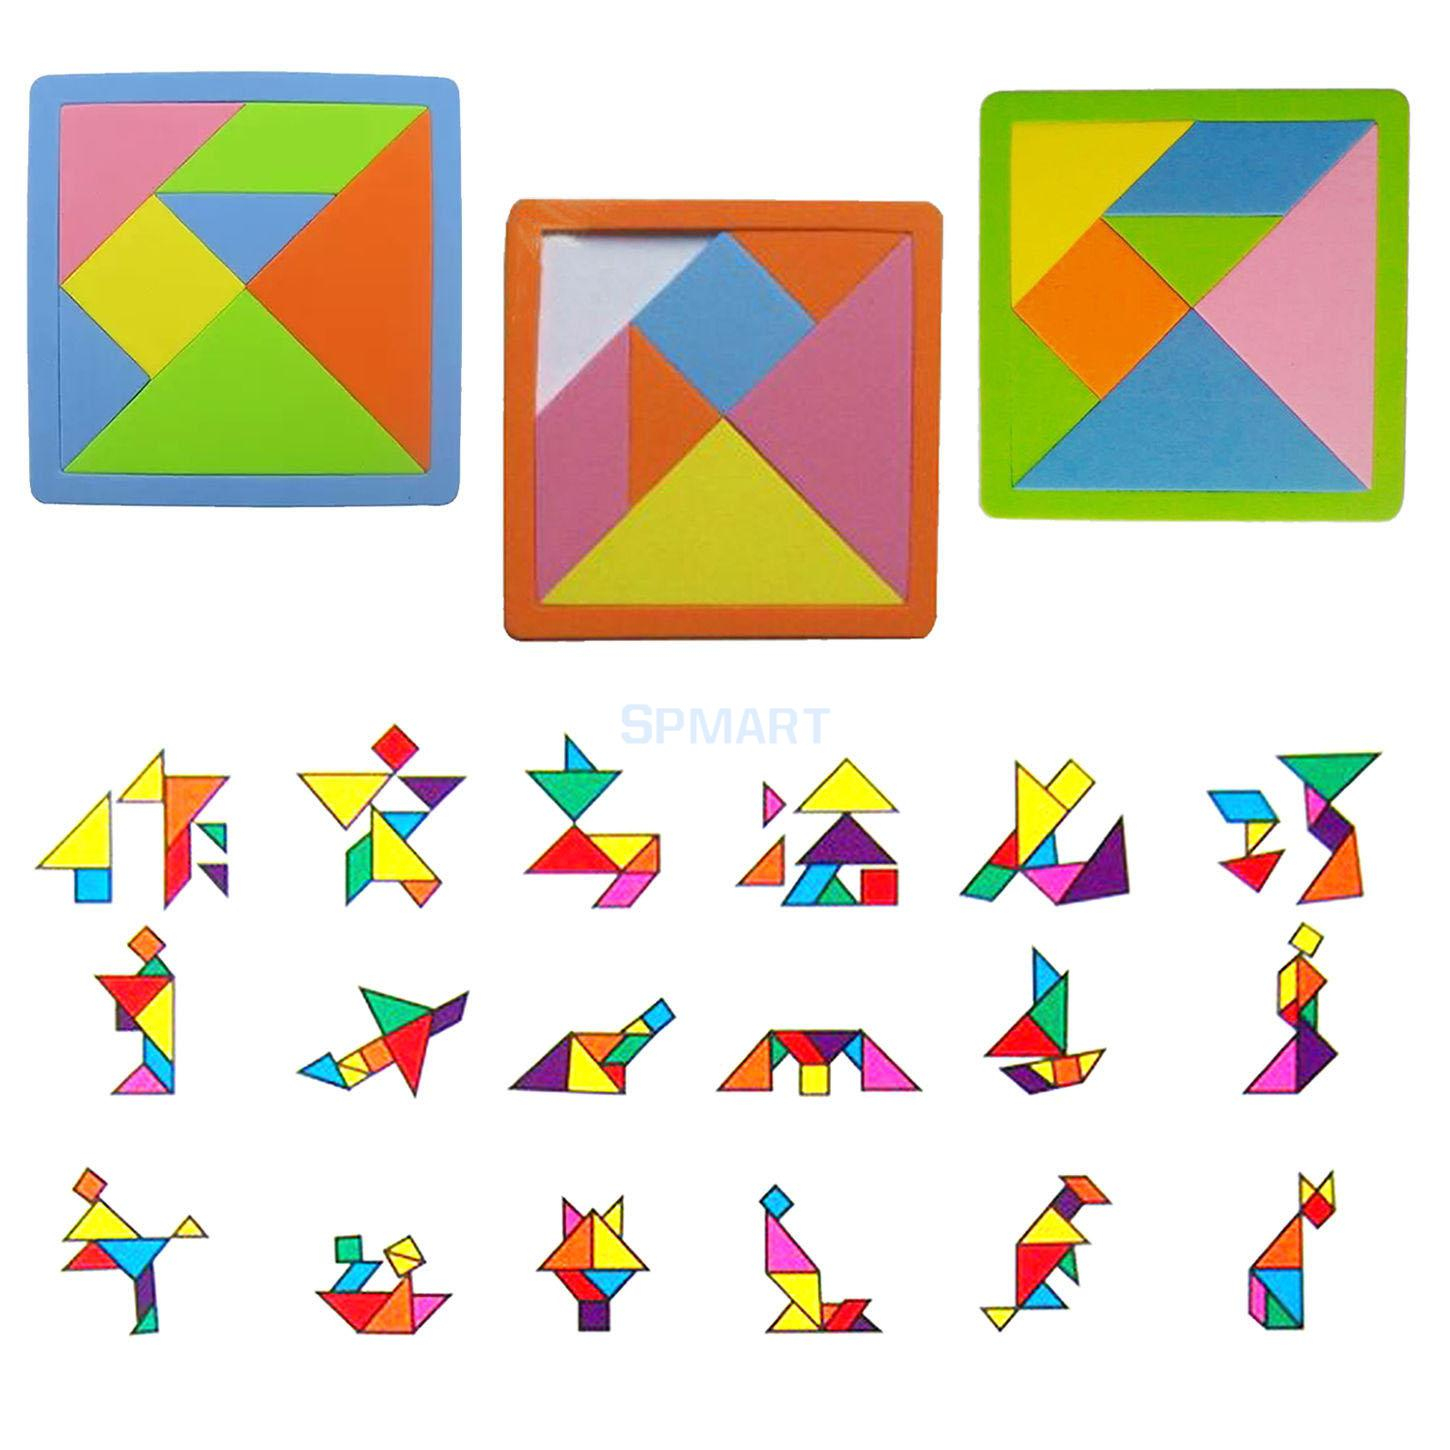 Us $1.61 21% Off|7 Pieces Eva Foam Tangram Brain Educational Teaser Puzzle  Game Kid Toys-In Puzzles From Toys &amp;amp; Hobbies On Aliexpress | Alibaba - 7 Piece Tangram Puzzle Printable